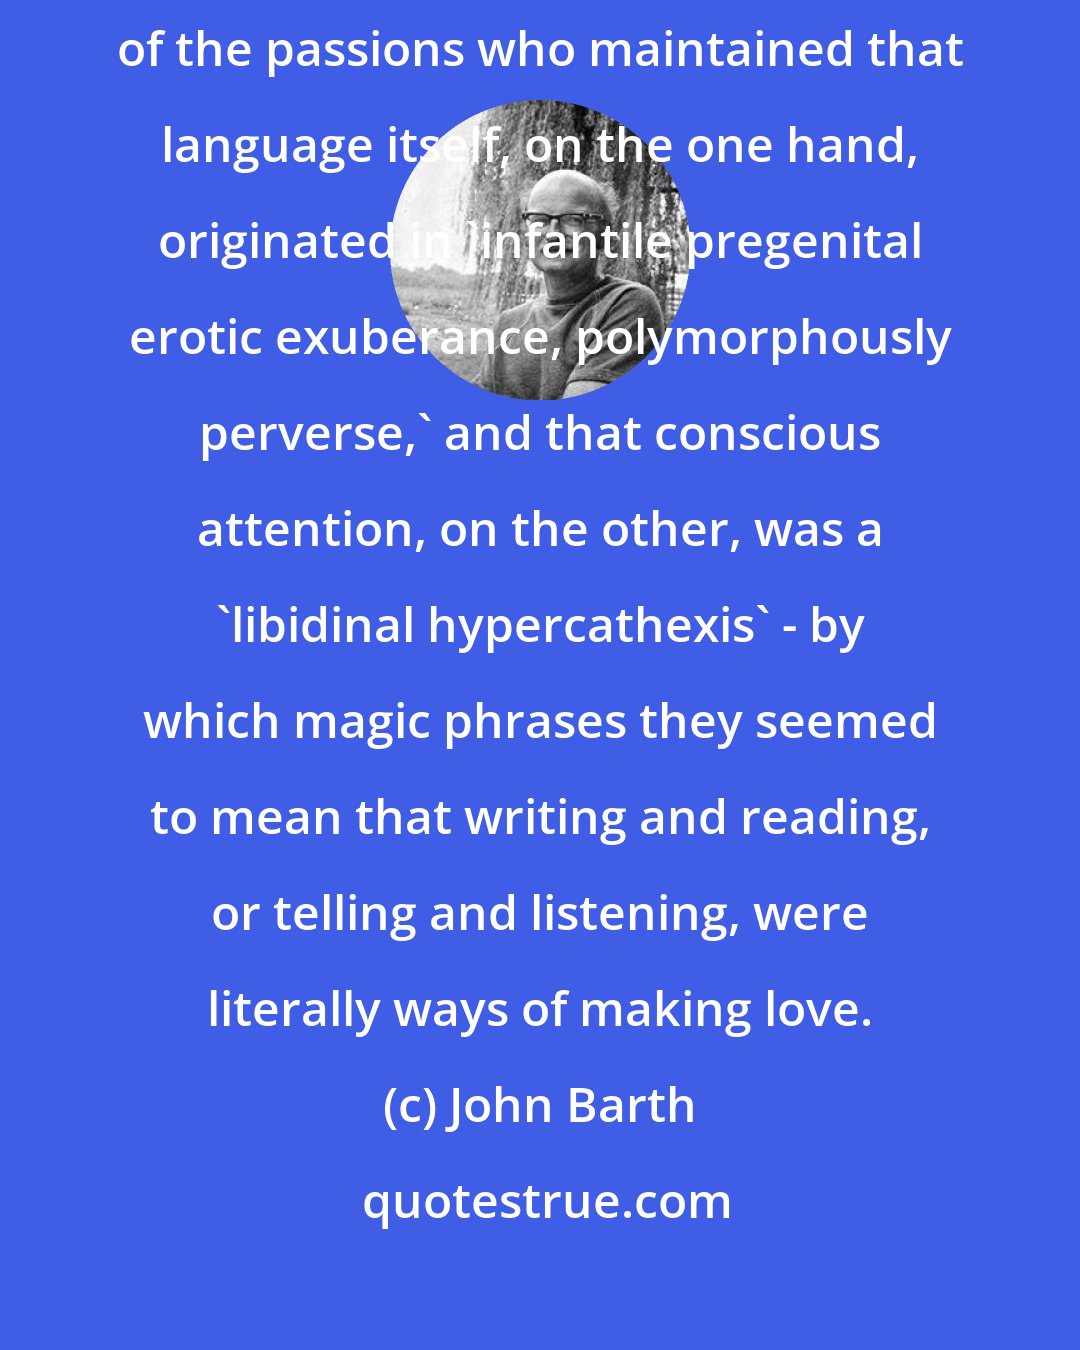 John Barth: The Genie declared that in his time and place there were scientists of the passions who maintained that language itself, on the one hand, originated in 'infantile pregenital erotic exuberance, polymorphously perverse,' and that conscious attention, on the other, was a 'libidinal hypercathexis' - by which magic phrases they seemed to mean that writing and reading, or telling and listening, were literally ways of making love.